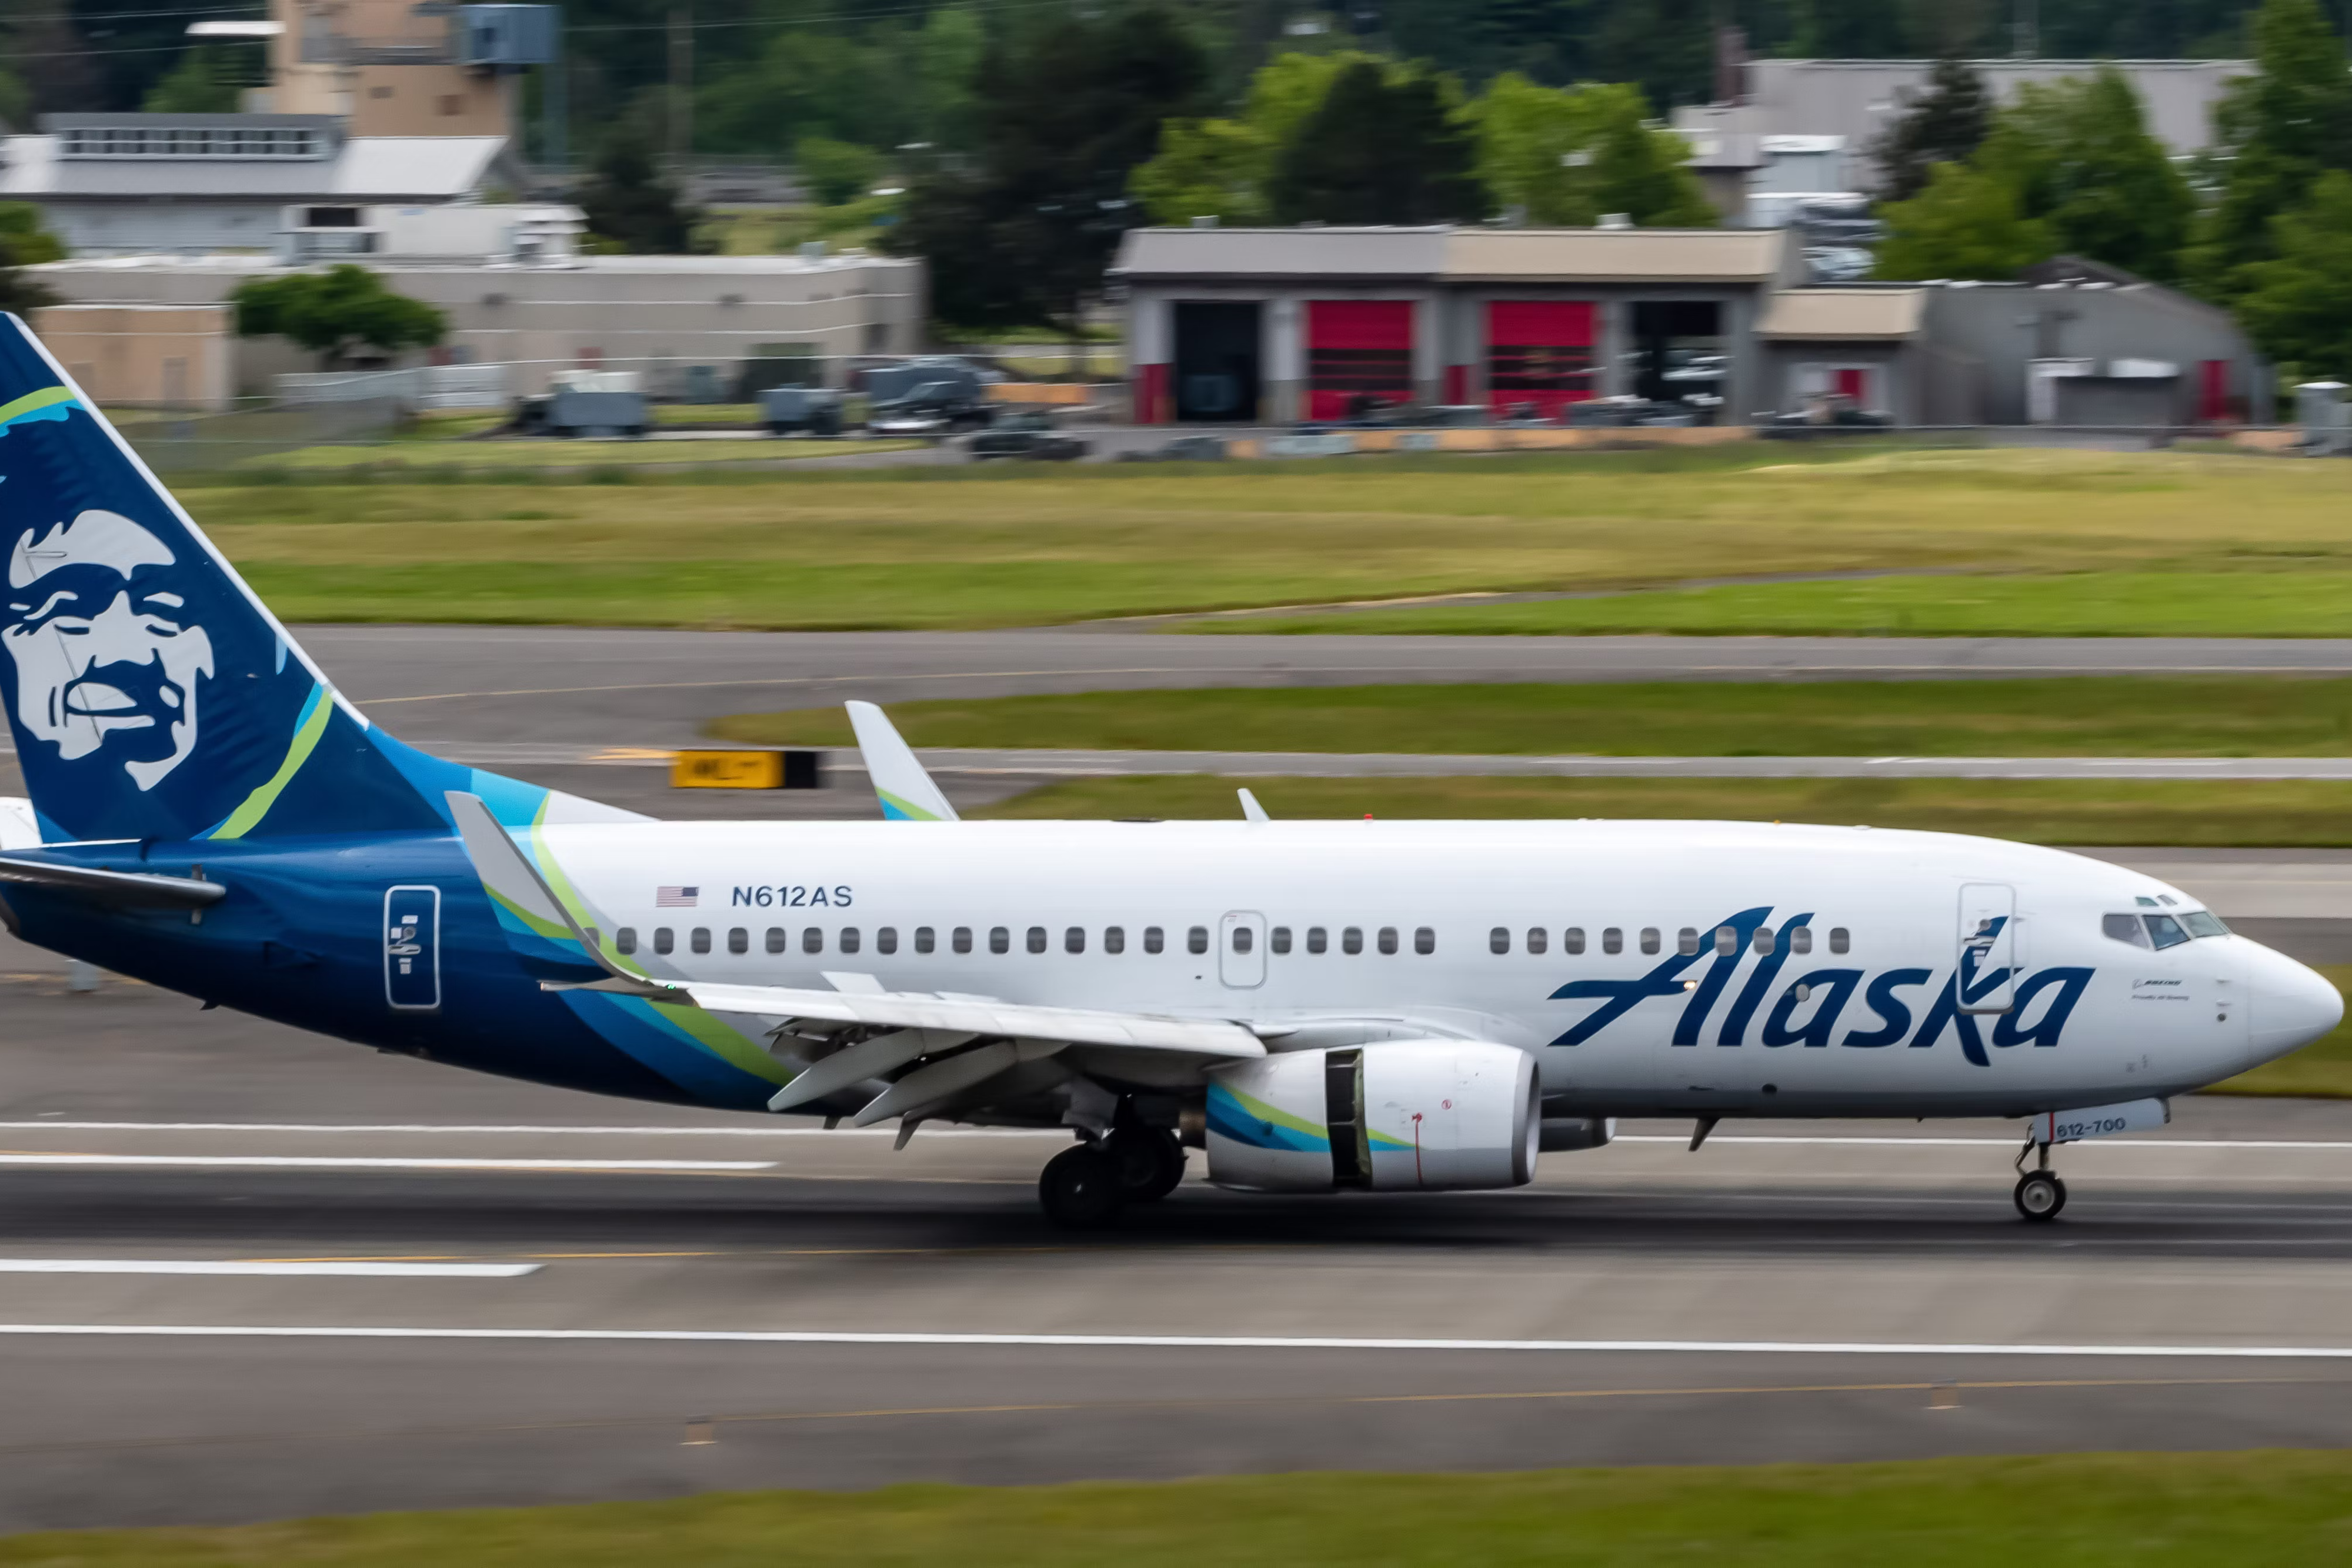 An Alaska Airlines Boeing 737-700 on an airport apron.